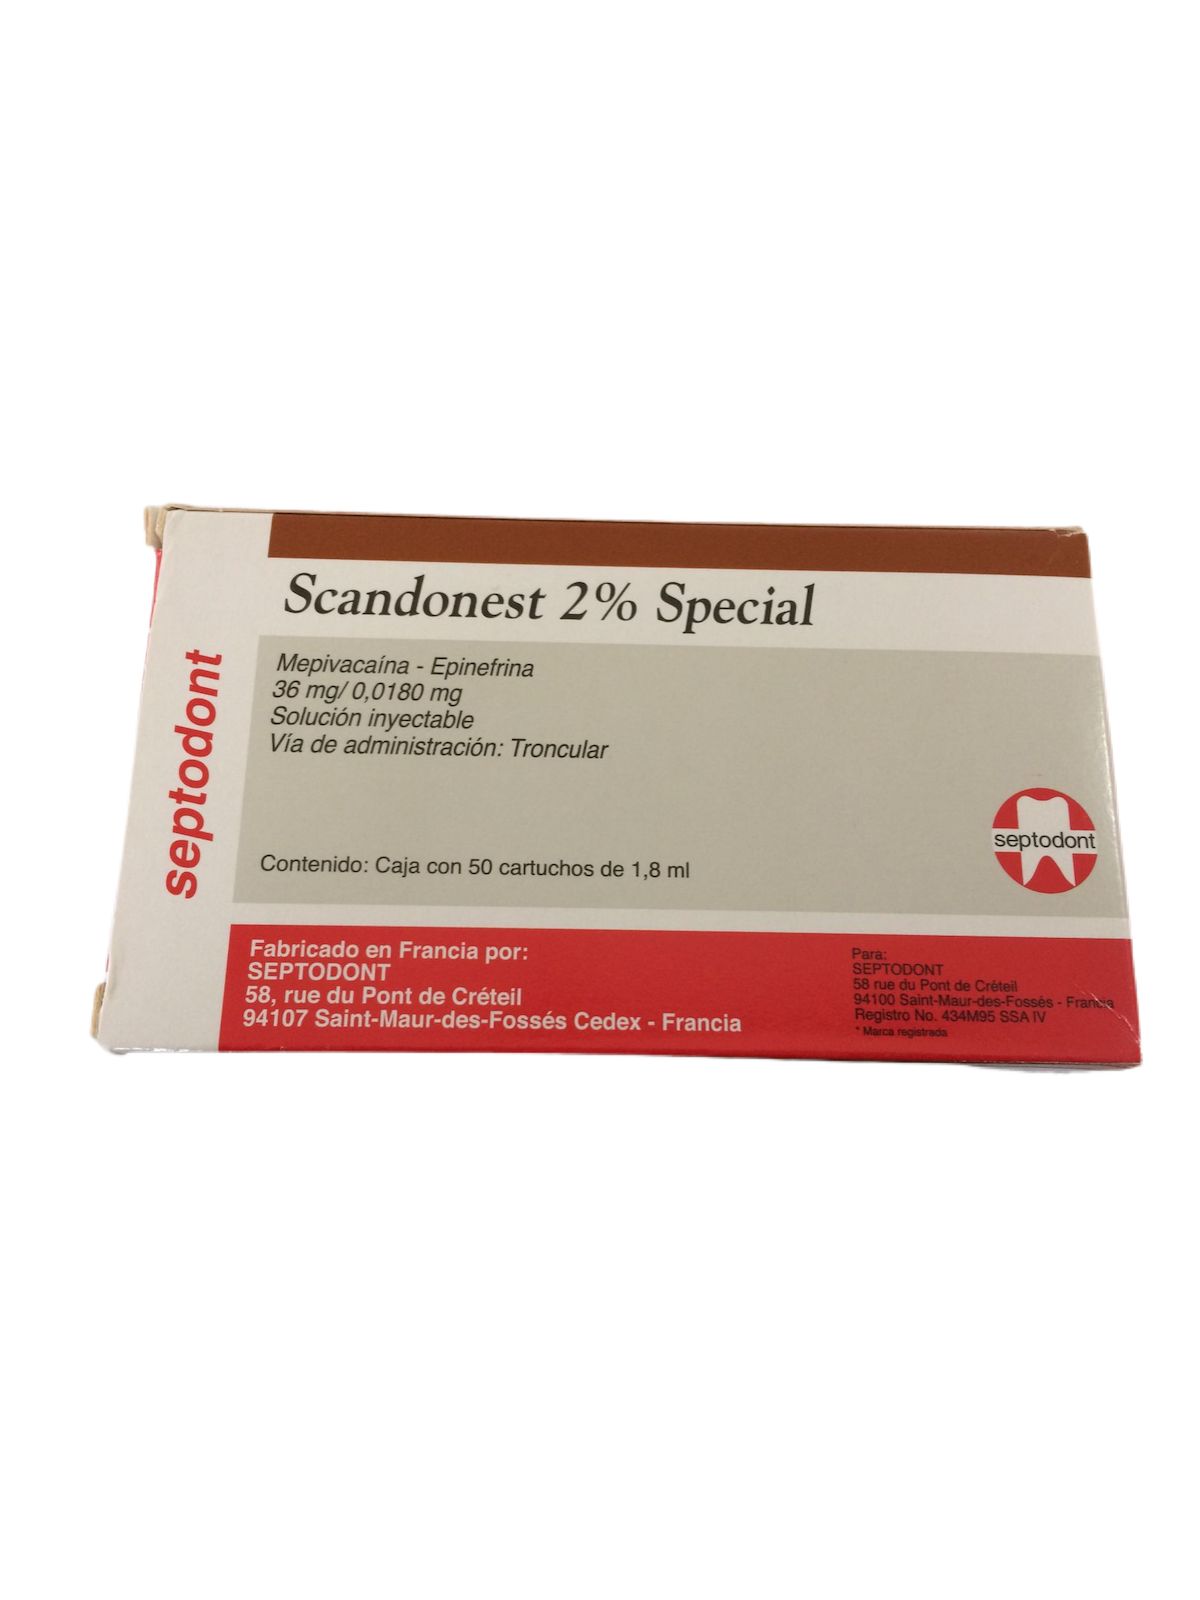 Scandonest Anesthesia 2% Special